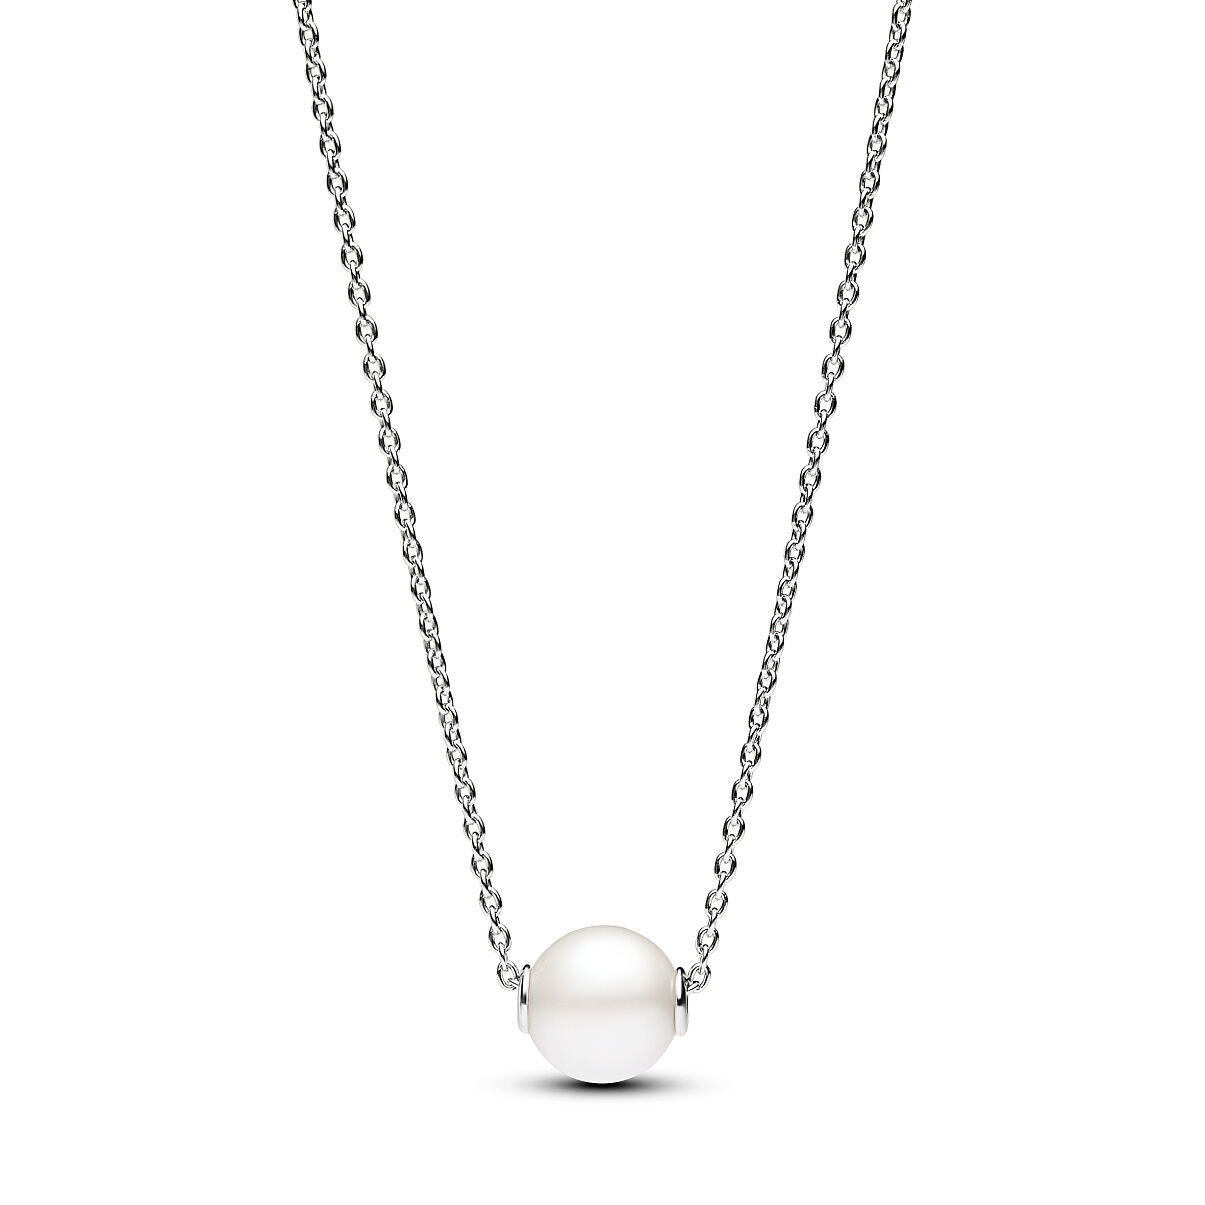 Pandora_Necklace_Sterling Silver_Freshwater Pearls_Cubic Zirconia_393167C01_119,00 Euro (2)